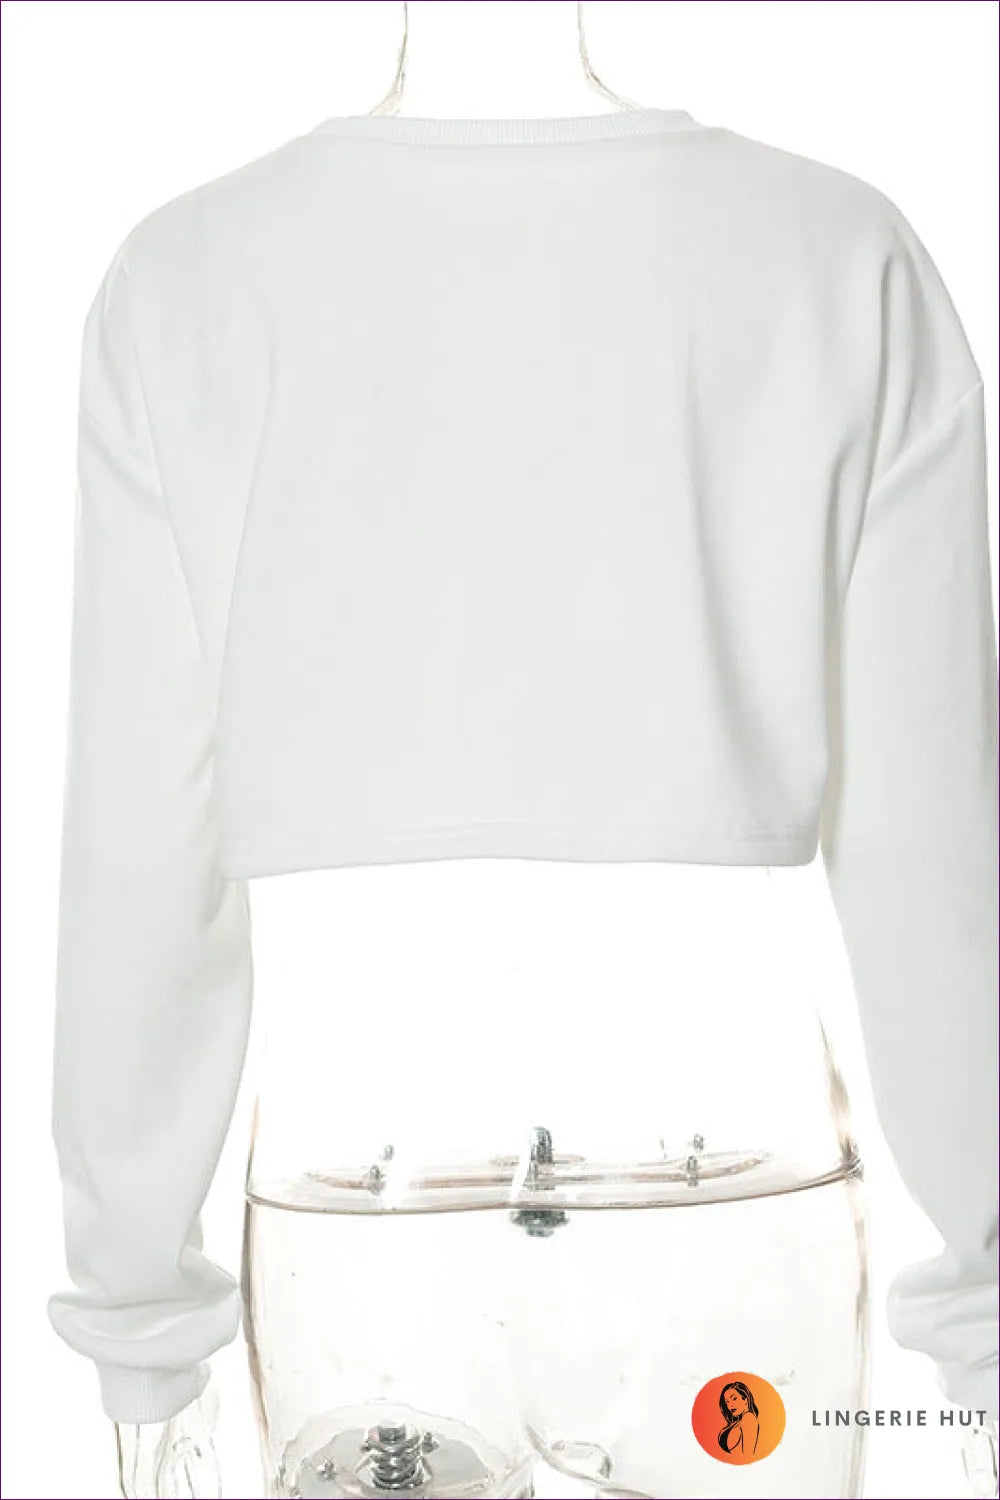 This Stylish Printed Long Sleeve Crop Top Is Perfect For a Night Out Or Can Be Dressed Down And Worn Casually.